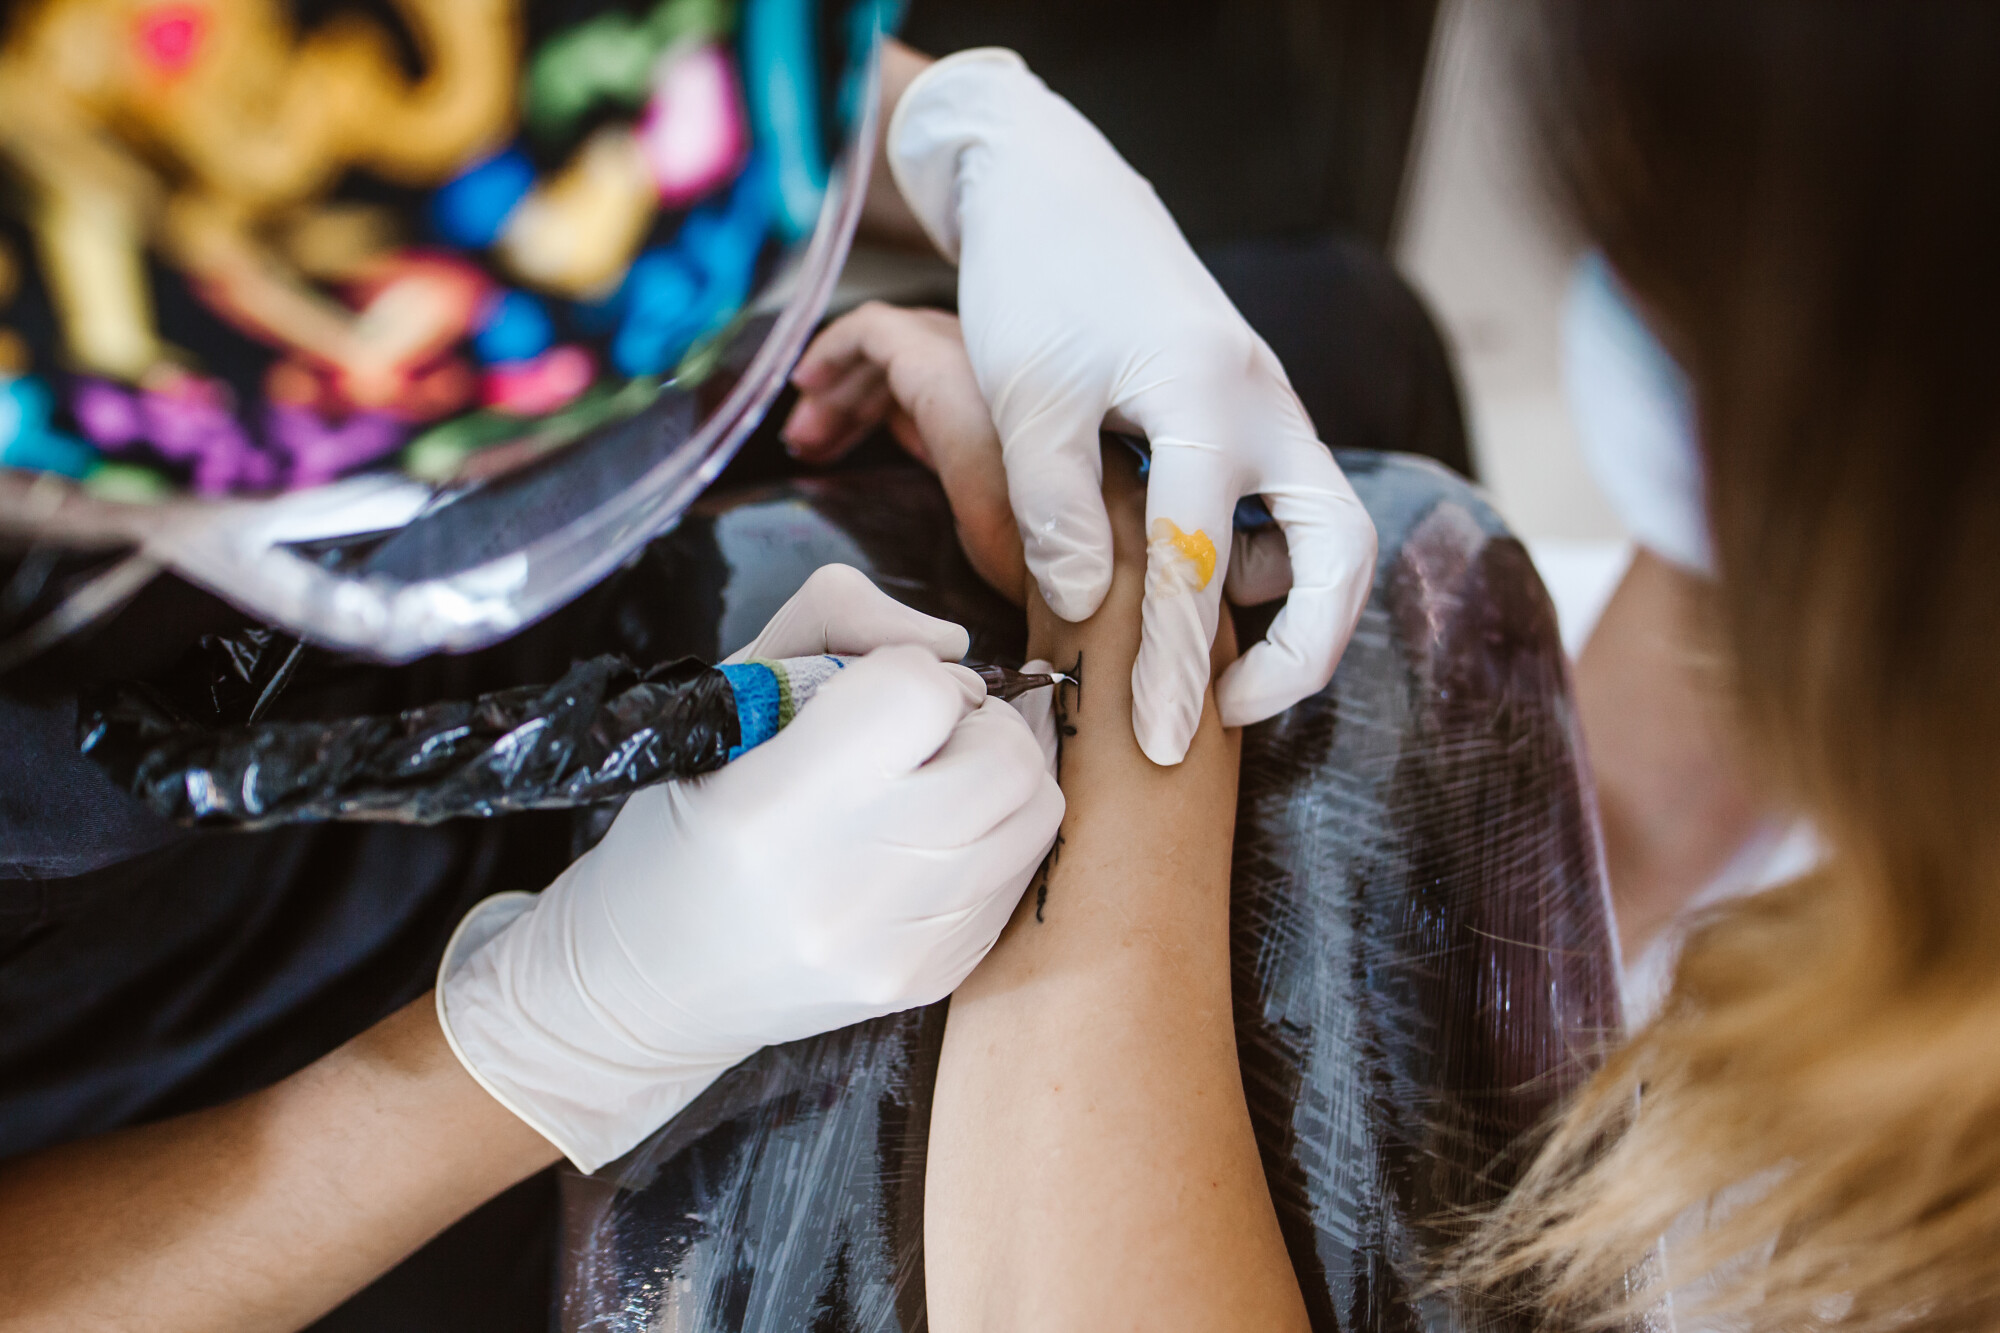 Woman being tattooed on the side of the wrist with a gloved person using tattoo equipment.